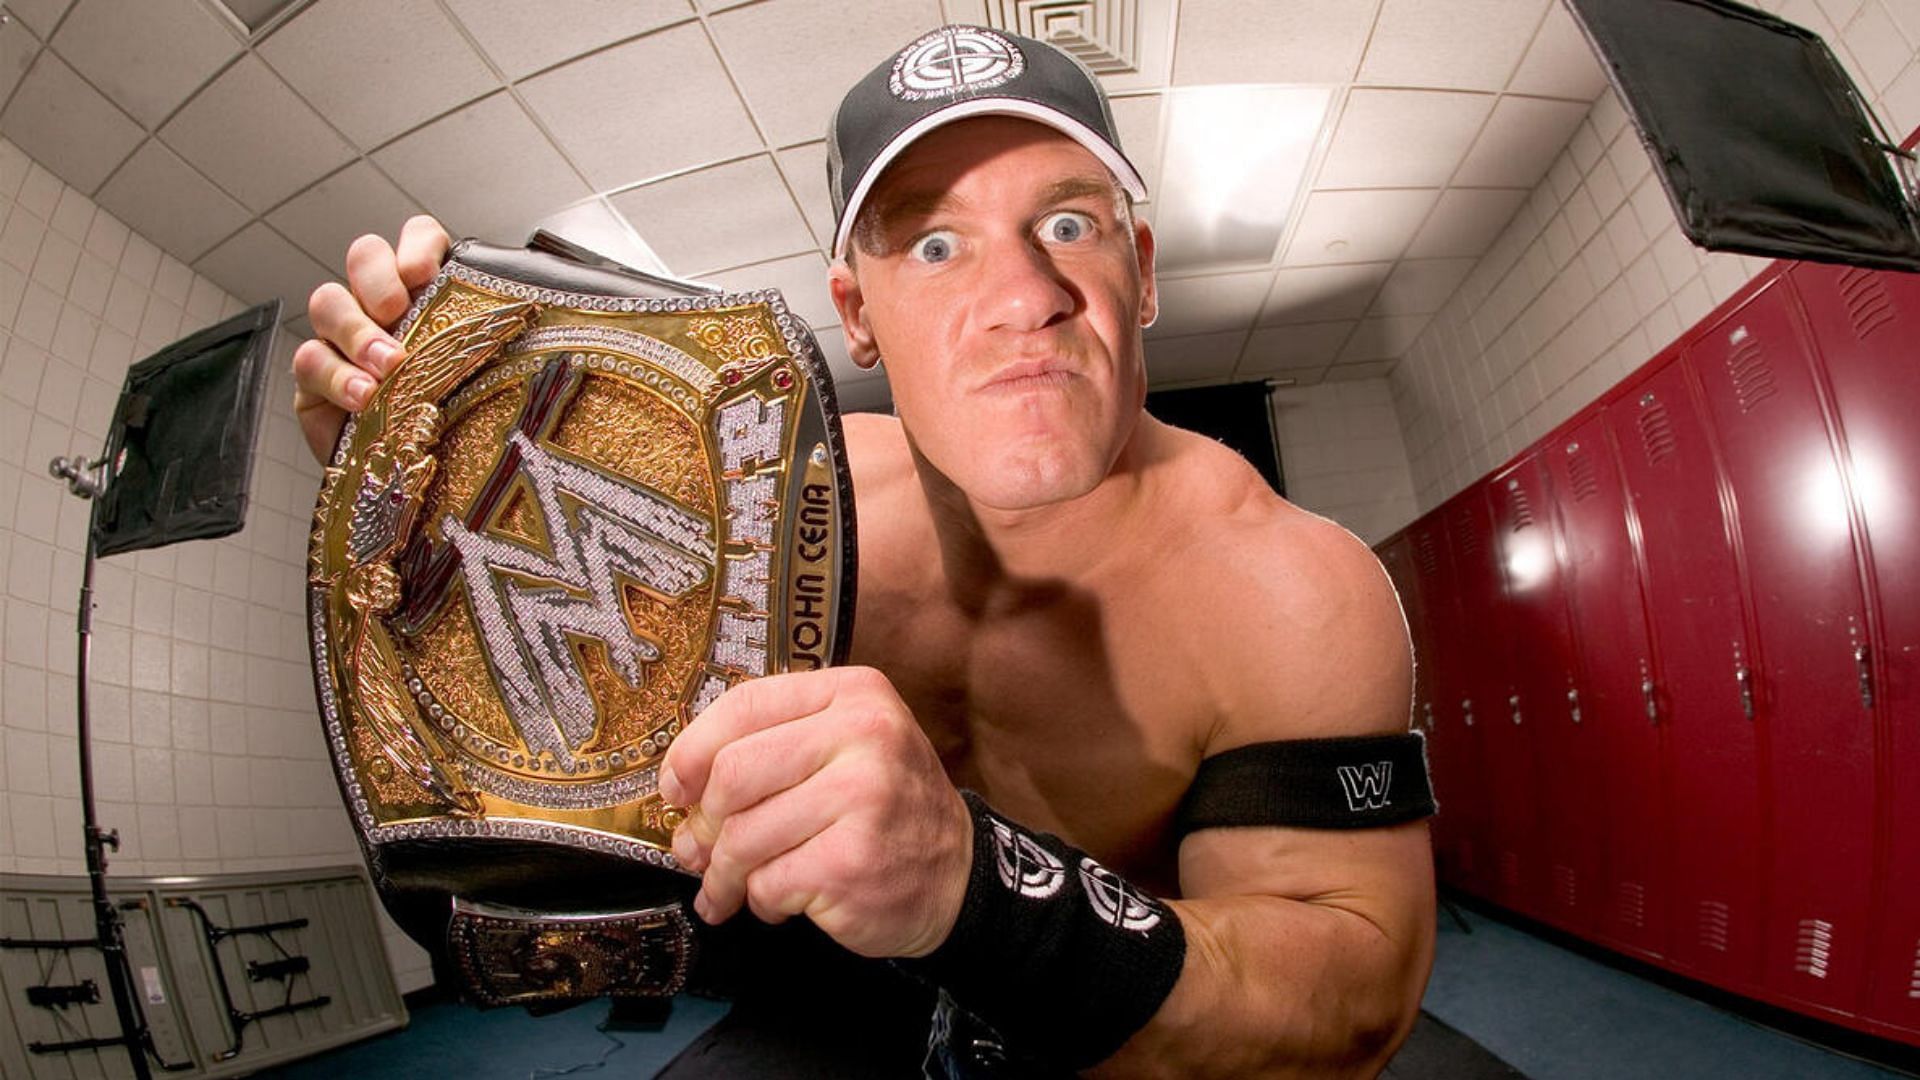 John Cena introduced the &quot;spinner belt&quot; on weekly television!